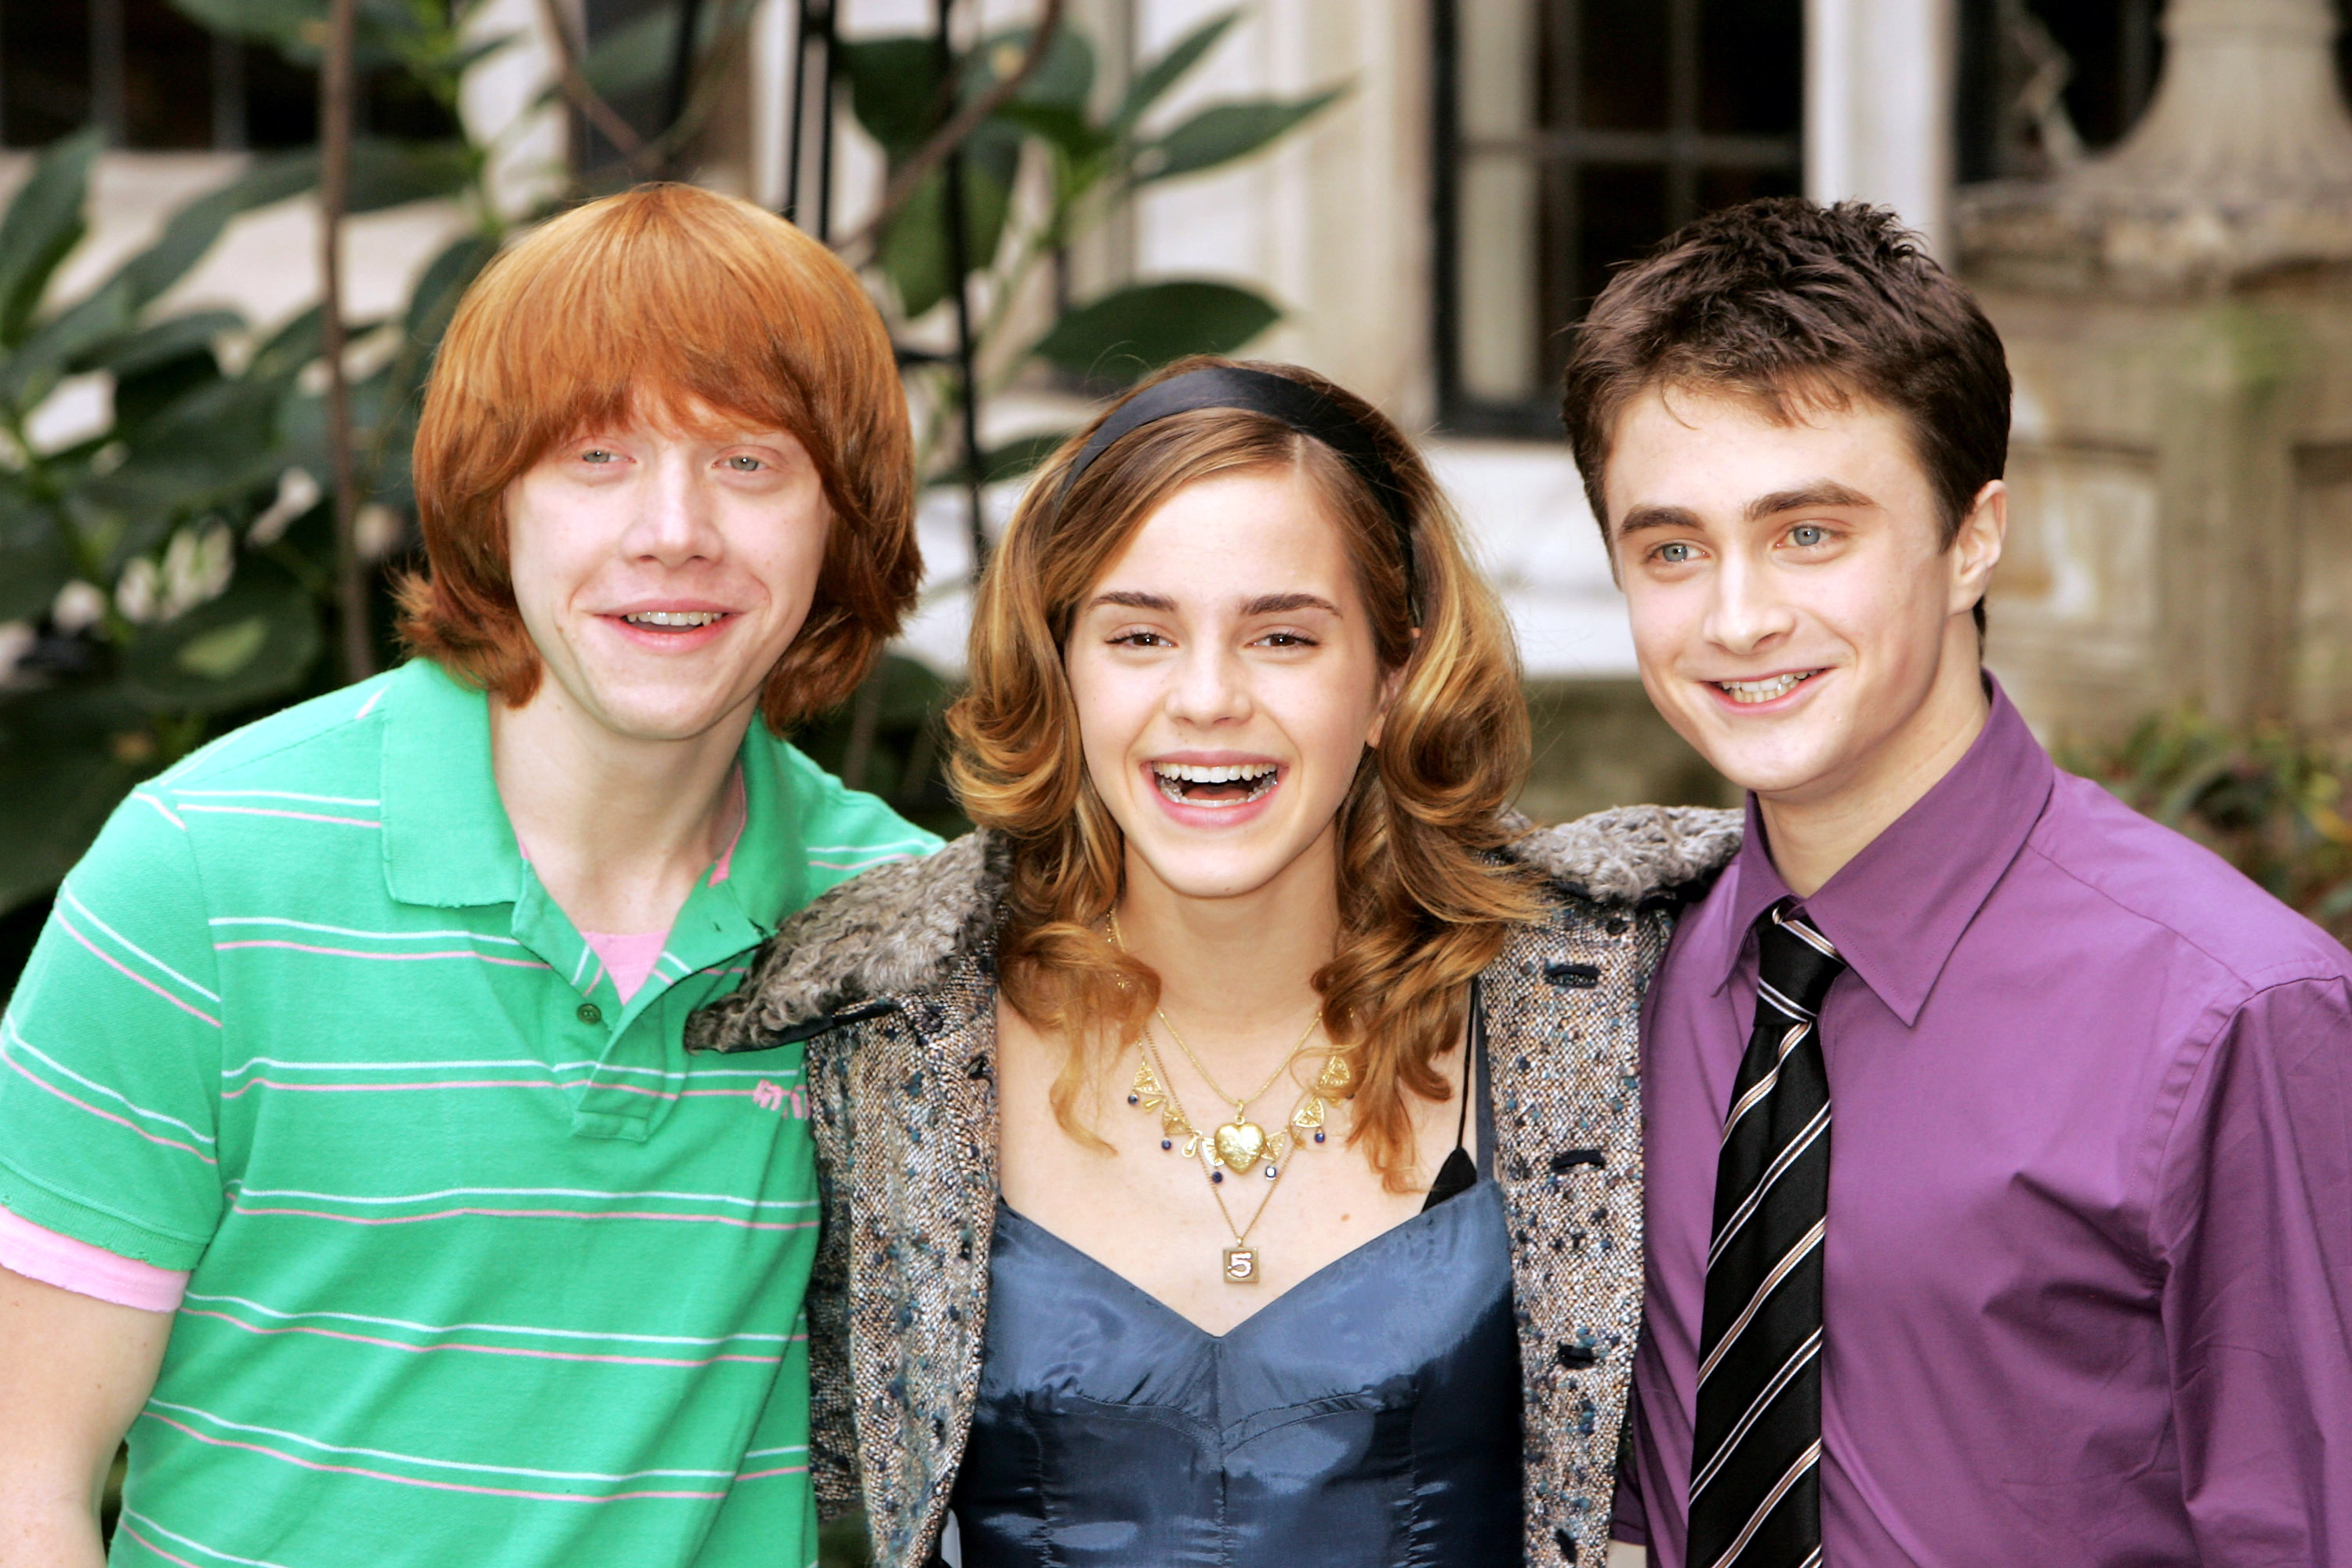 Rupert Grint, Emma Watson, and Daniel Radcliffe at a photocall for "Harry Potter And The Goblet Of Fire" in London, England on October 25, 2005 | Source: Getty Images